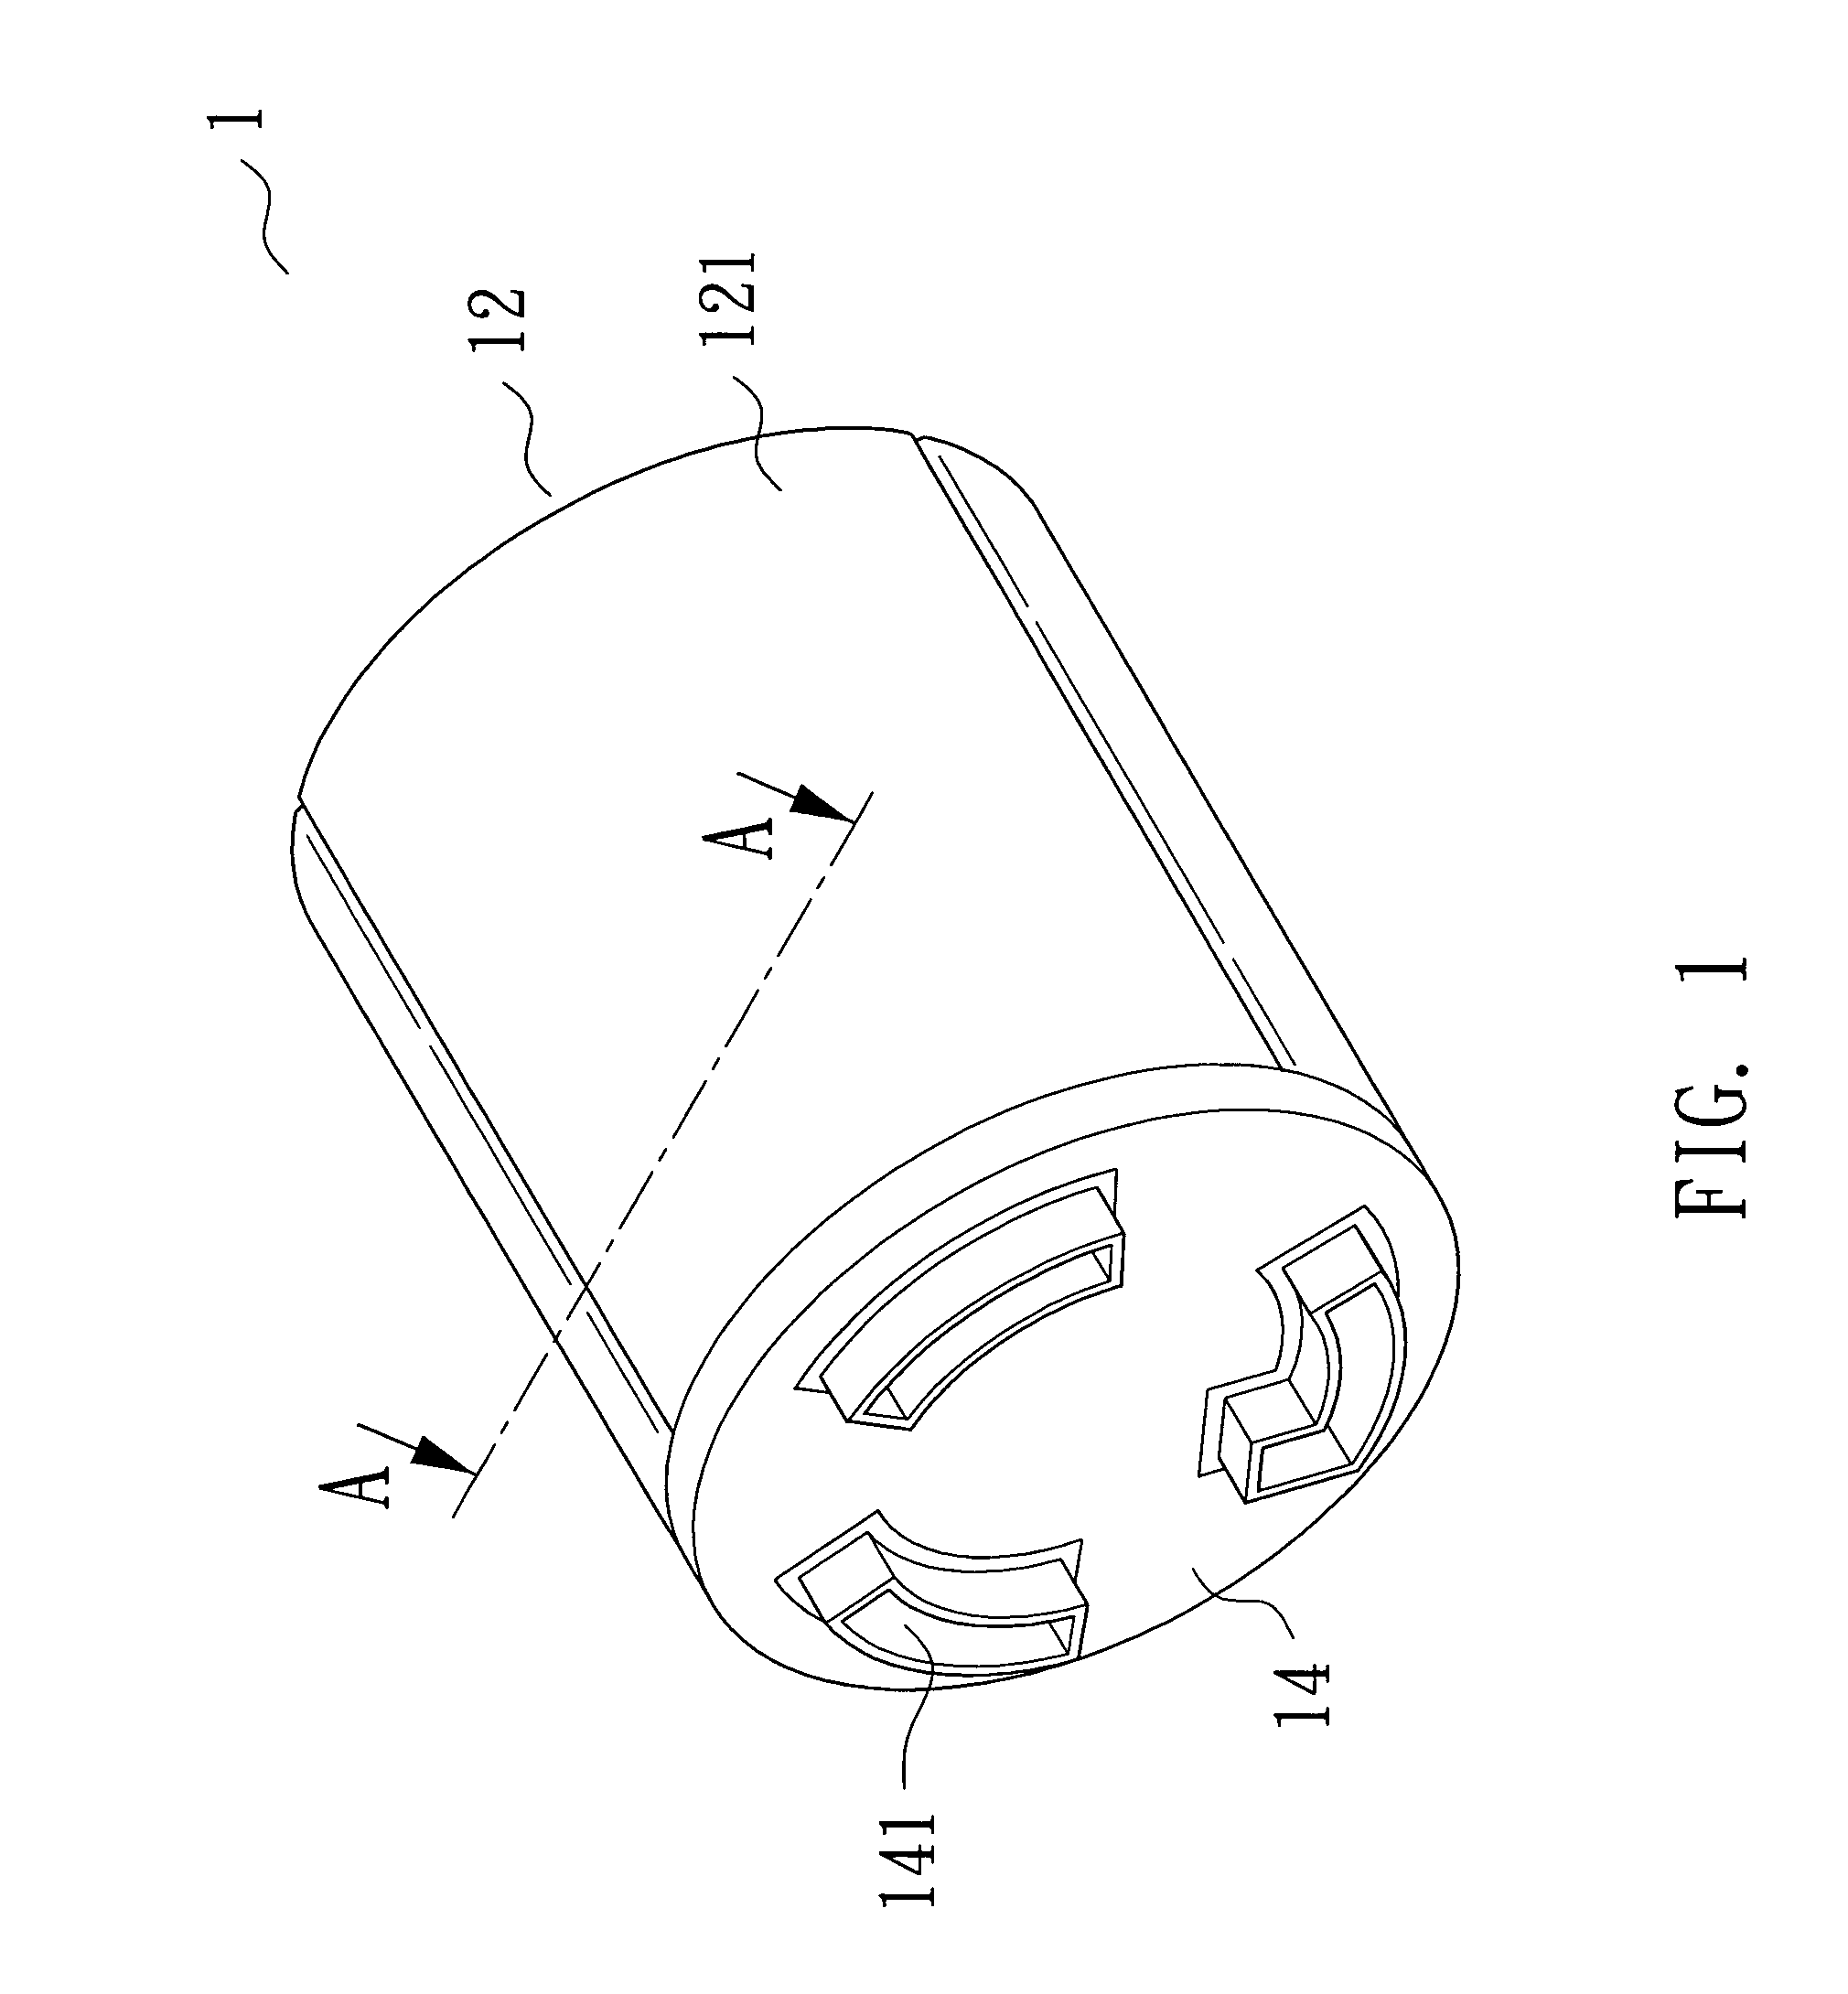 Assembly-type female connector